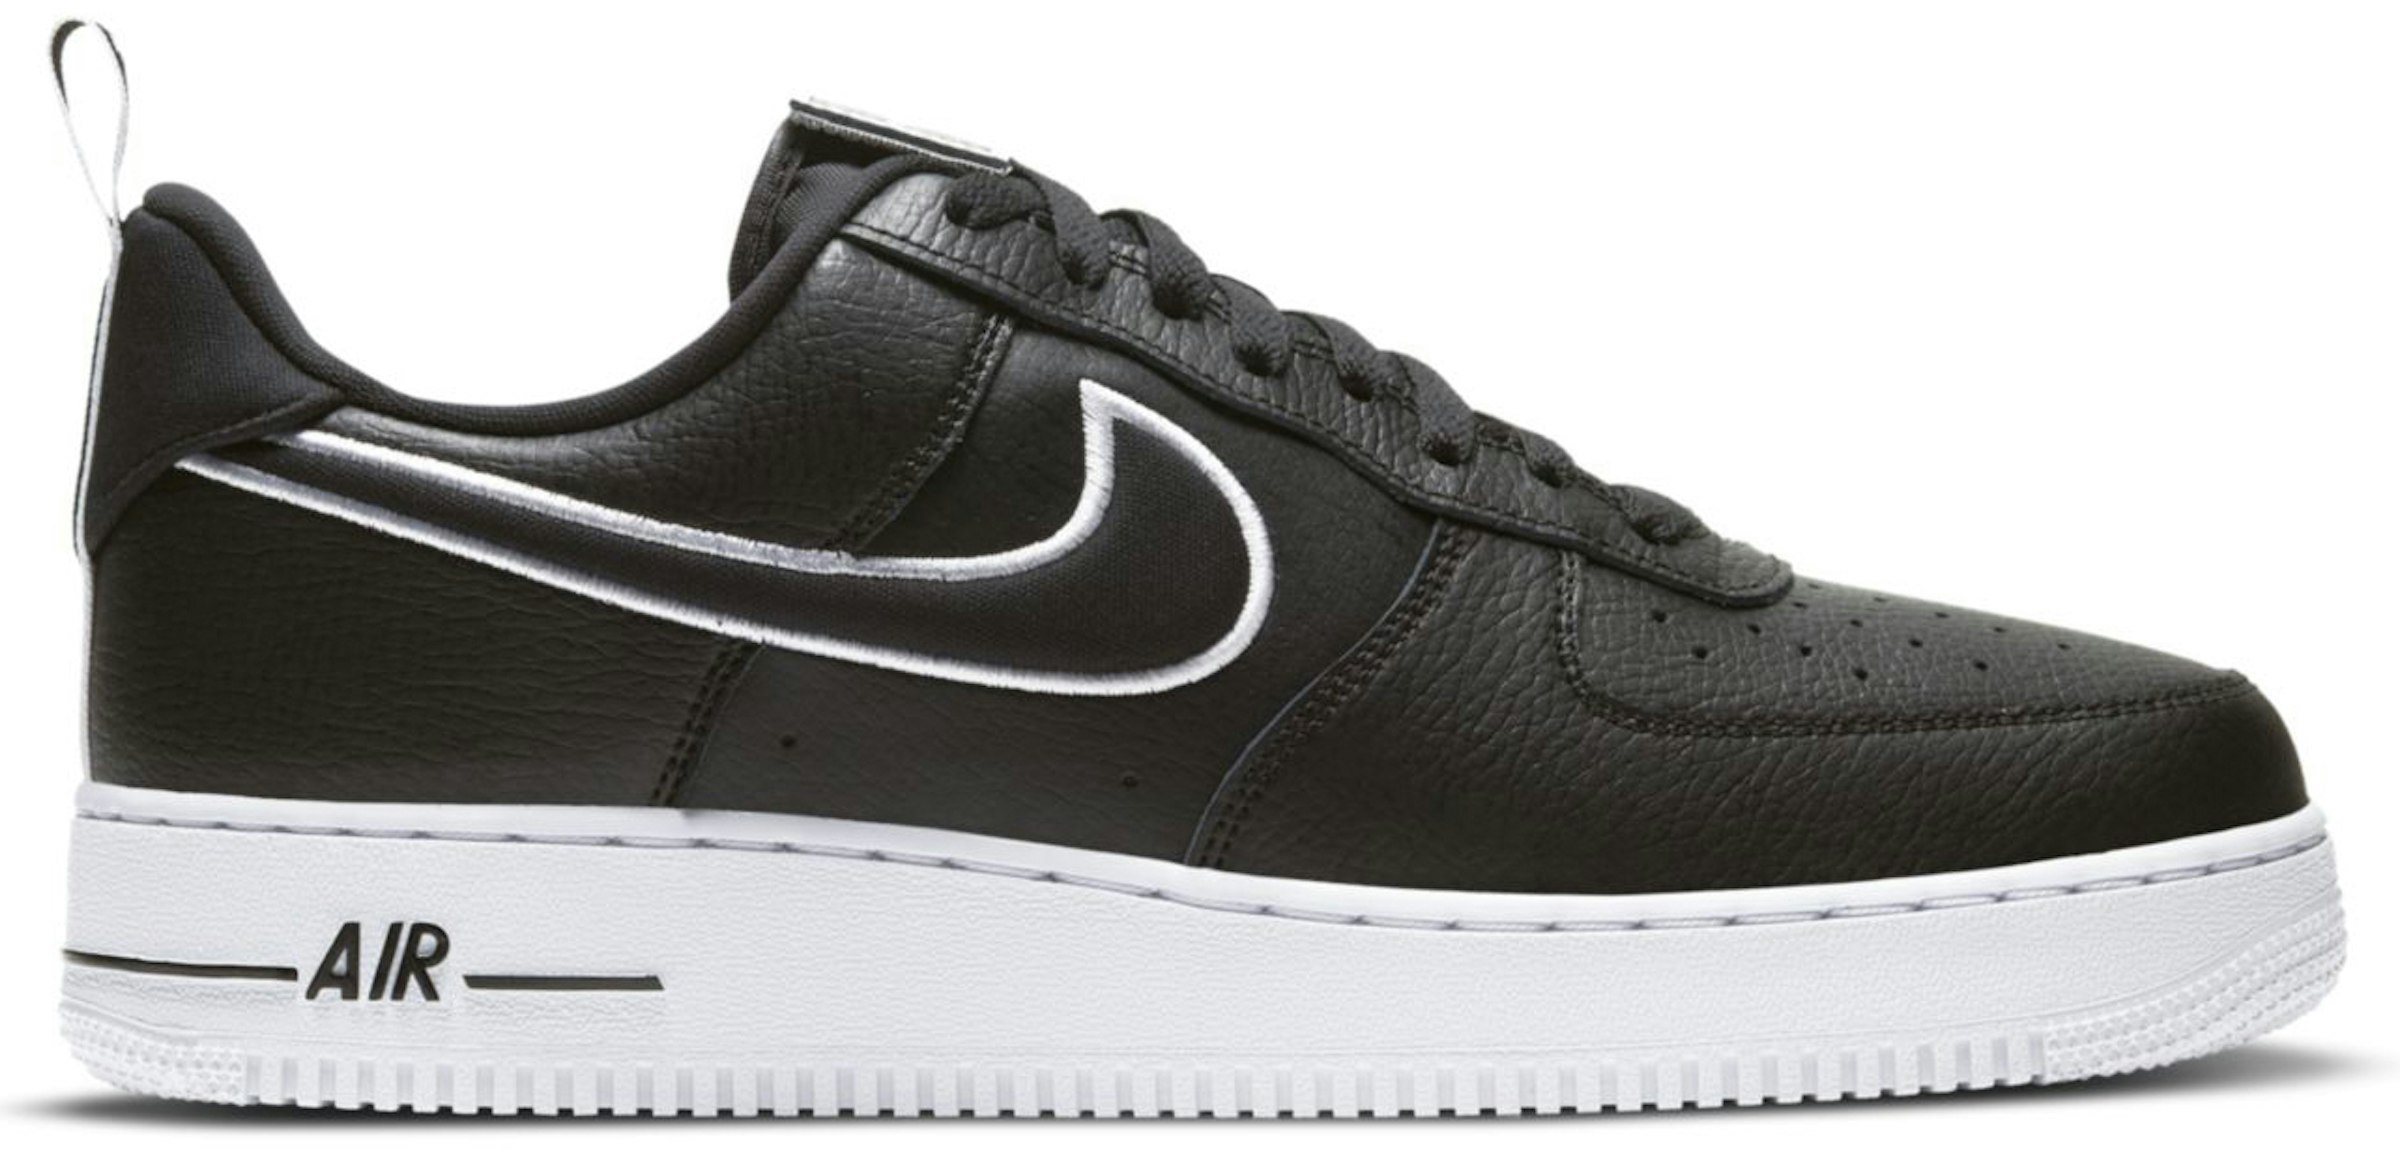 Nike Air Force 1 Low Black White Contrast Men's DH2472-001 -